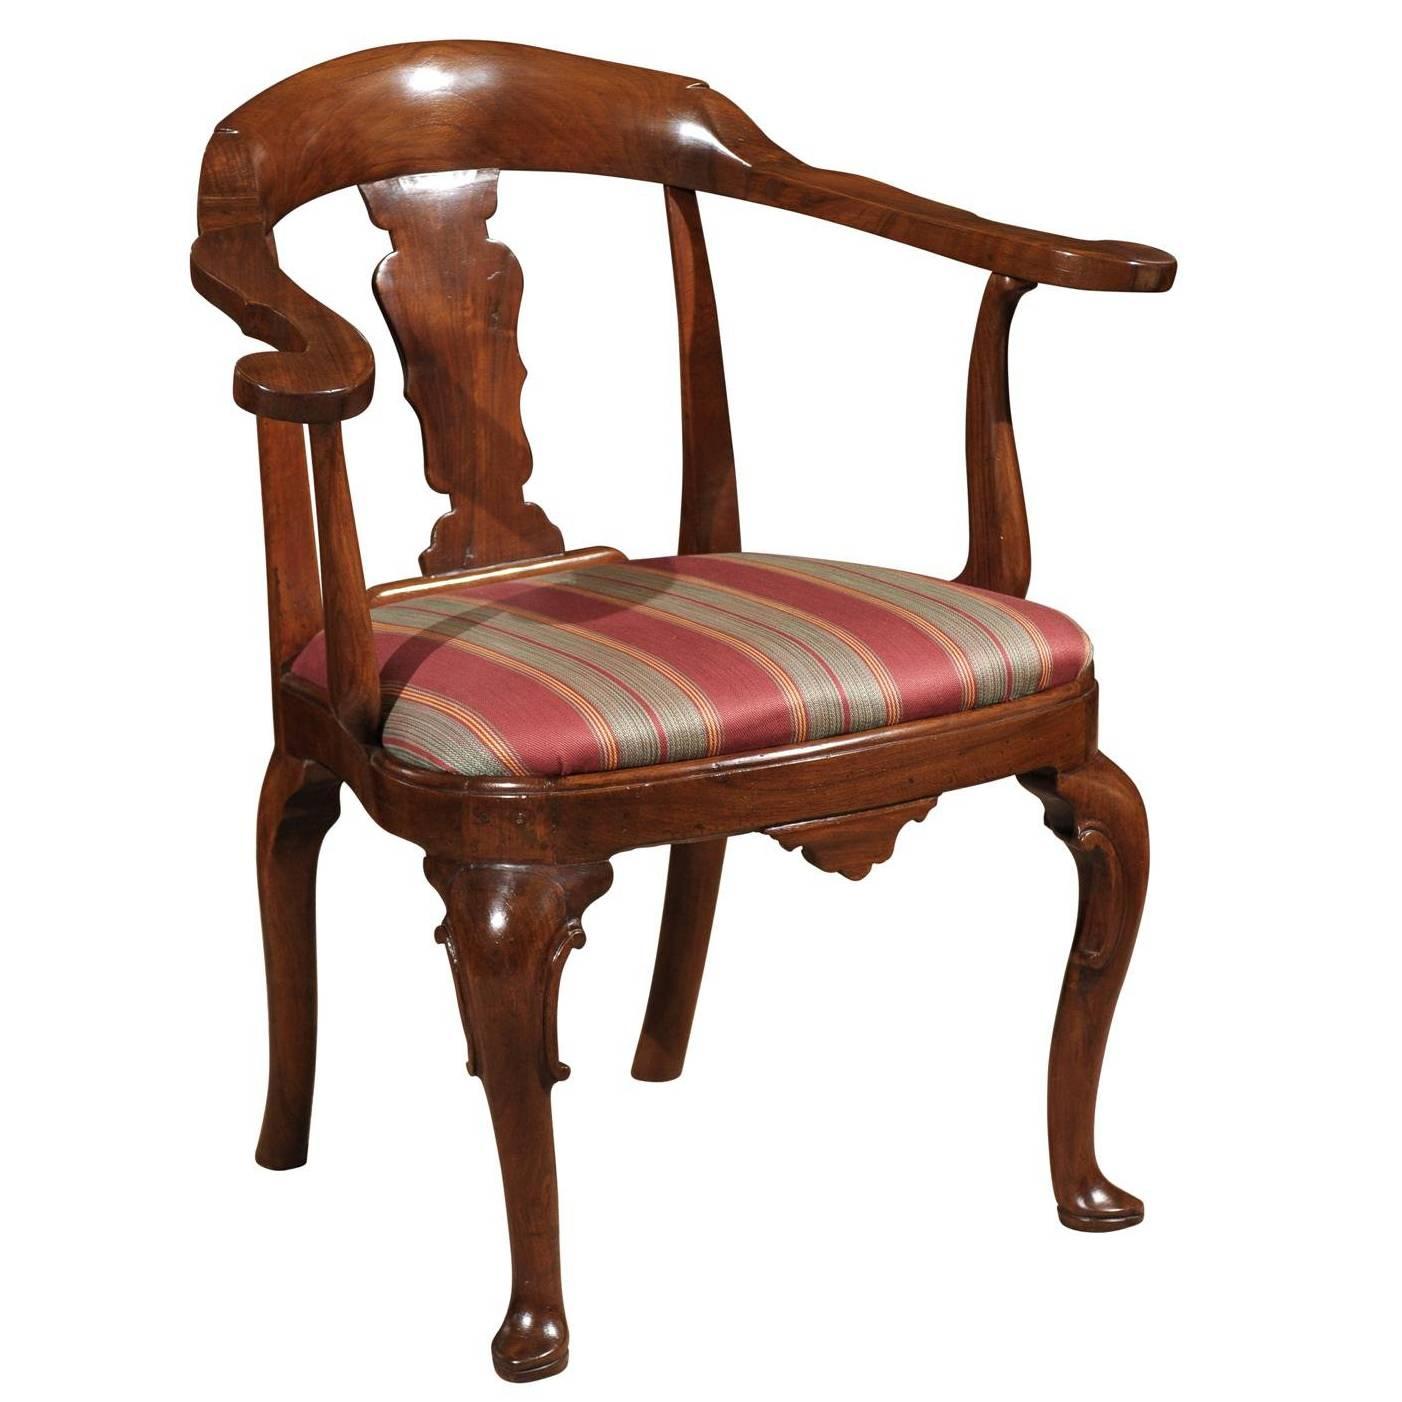 Walnut Desk Chair with Cabriole Leg and Pad Feet, Italy, Late 18th Century